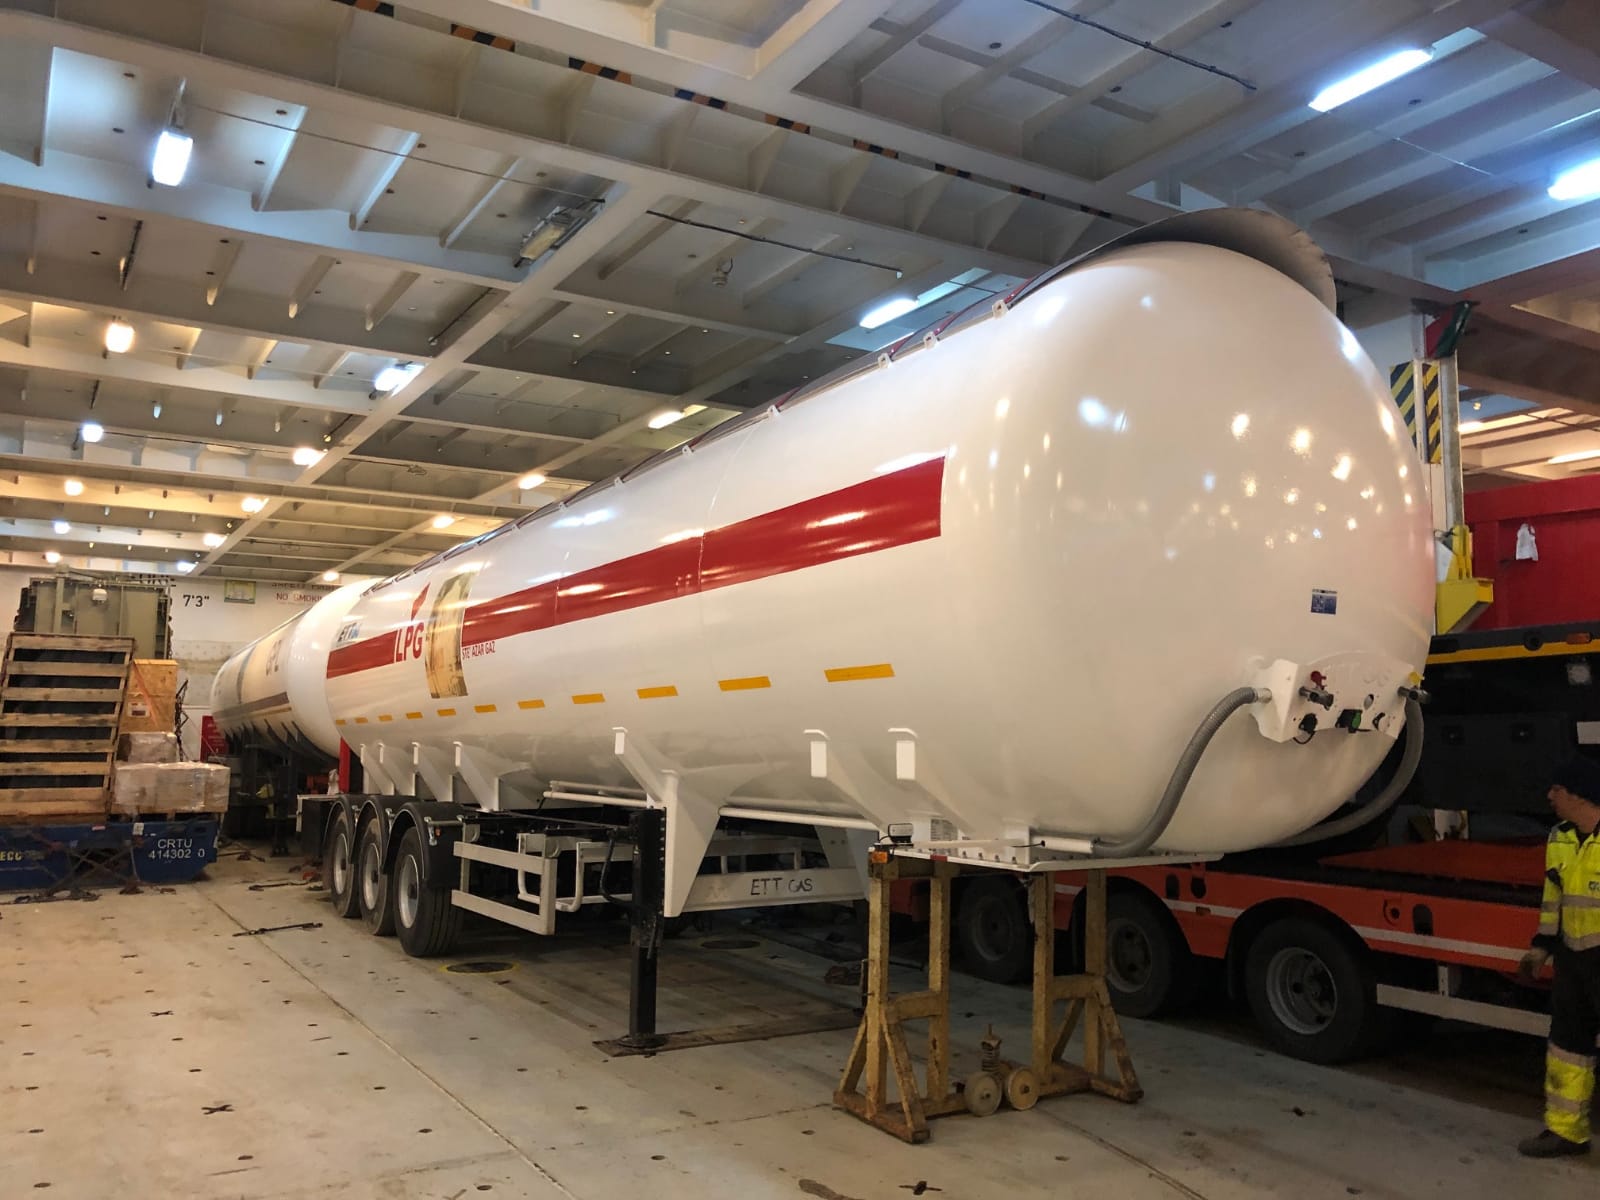 Another 57 M3 Lpg Trailer delivery to Niger 25.02.2019